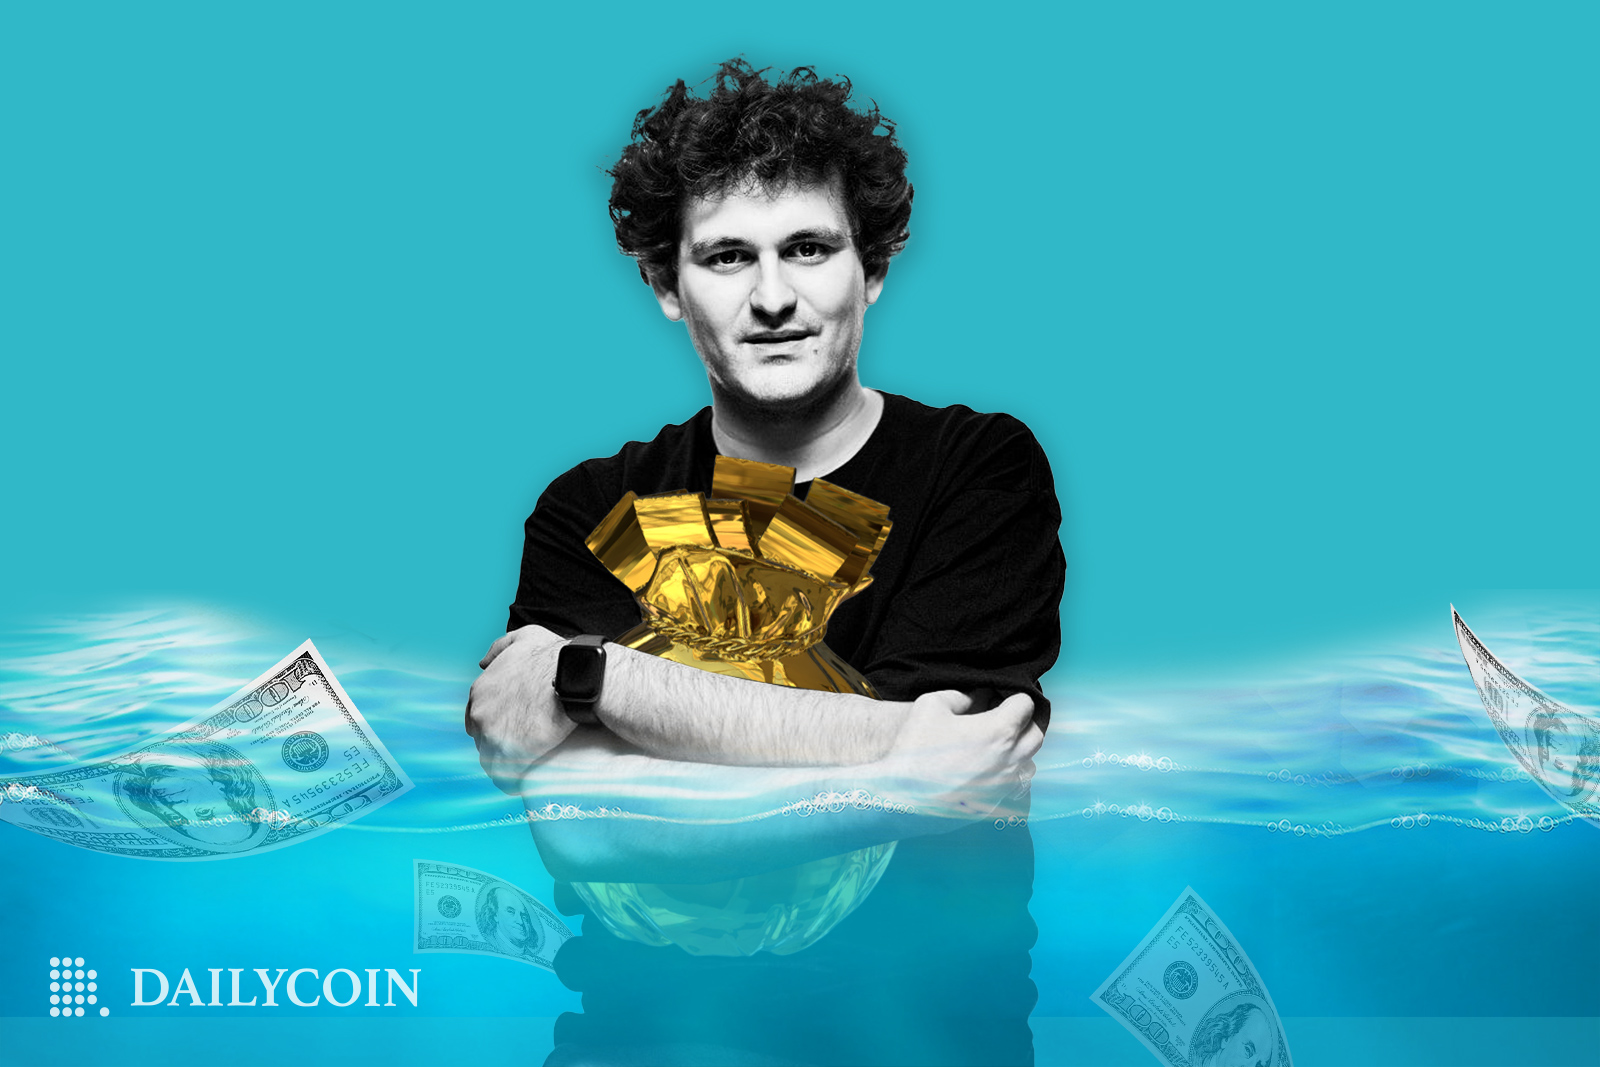 Sam Bankman-Fried standing in the water and holding a bag of cash